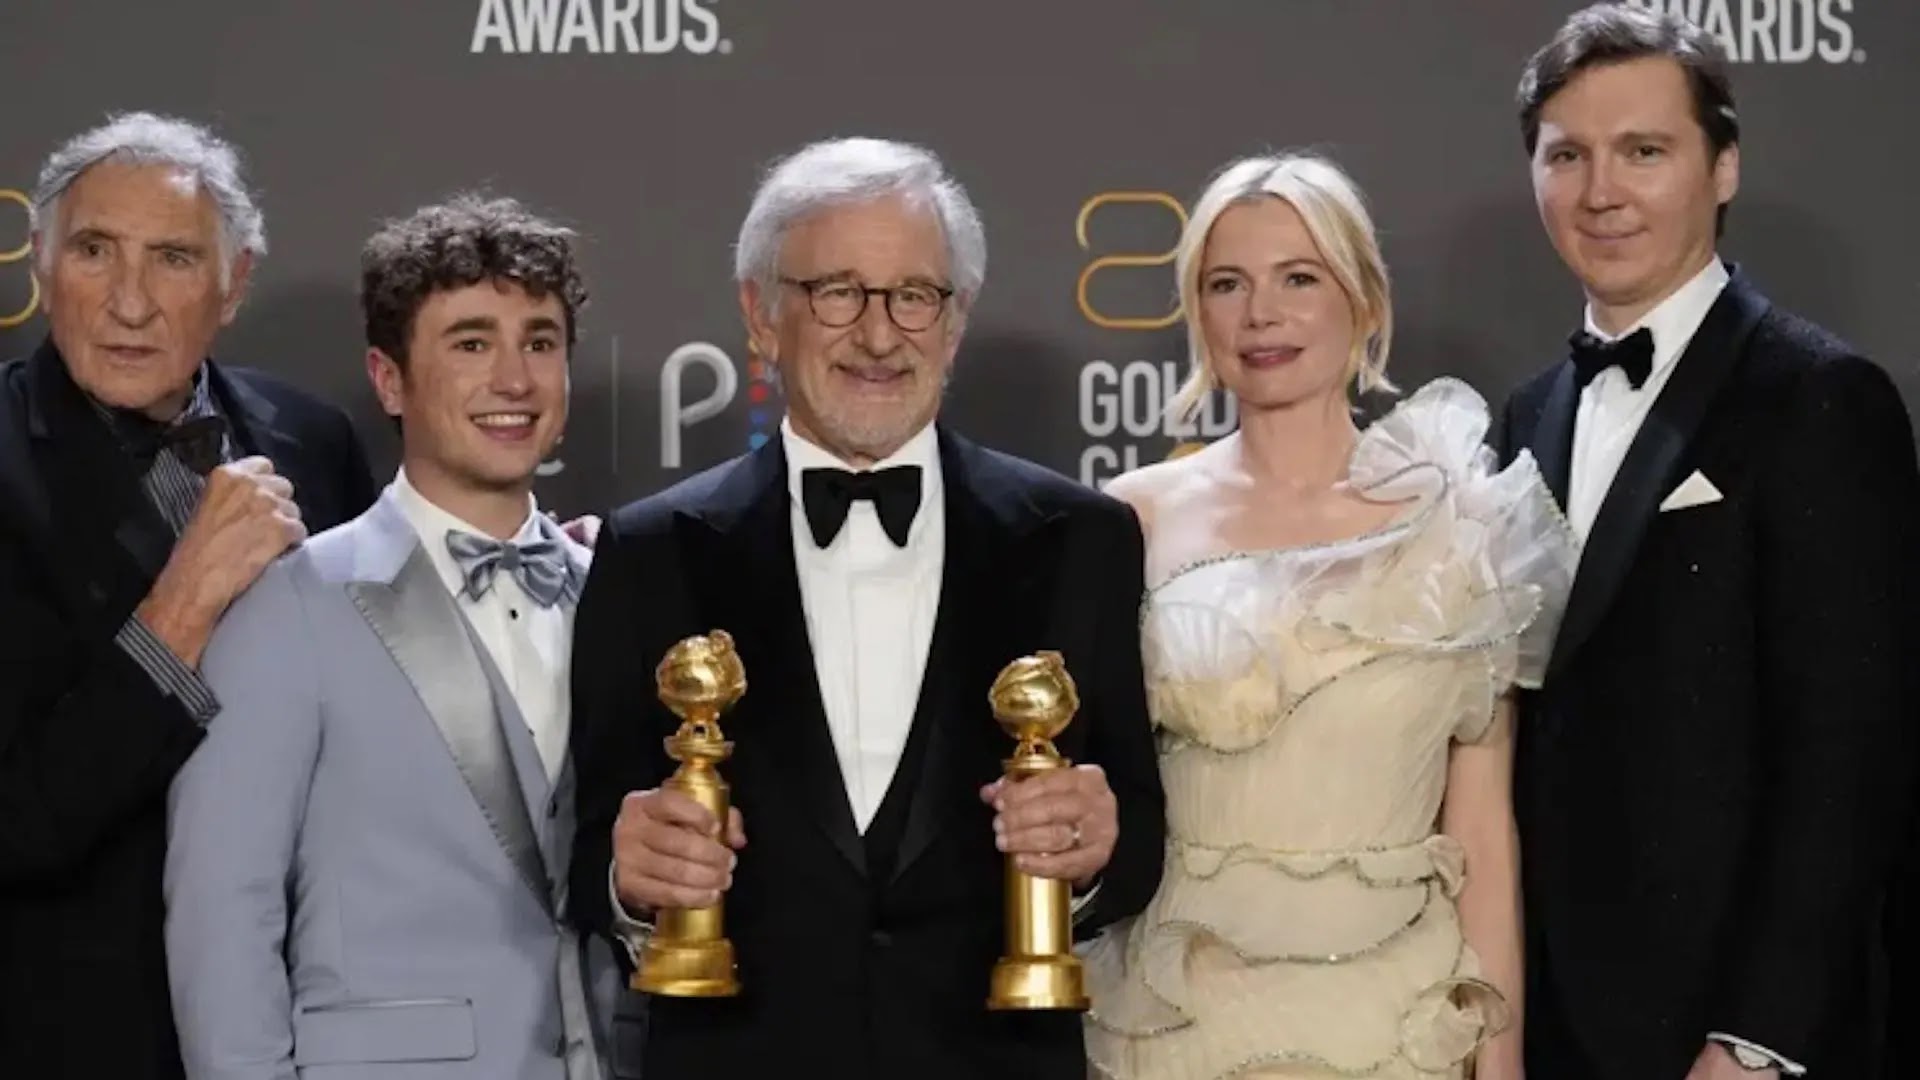 Audience for Golden Globes telecast nears record low